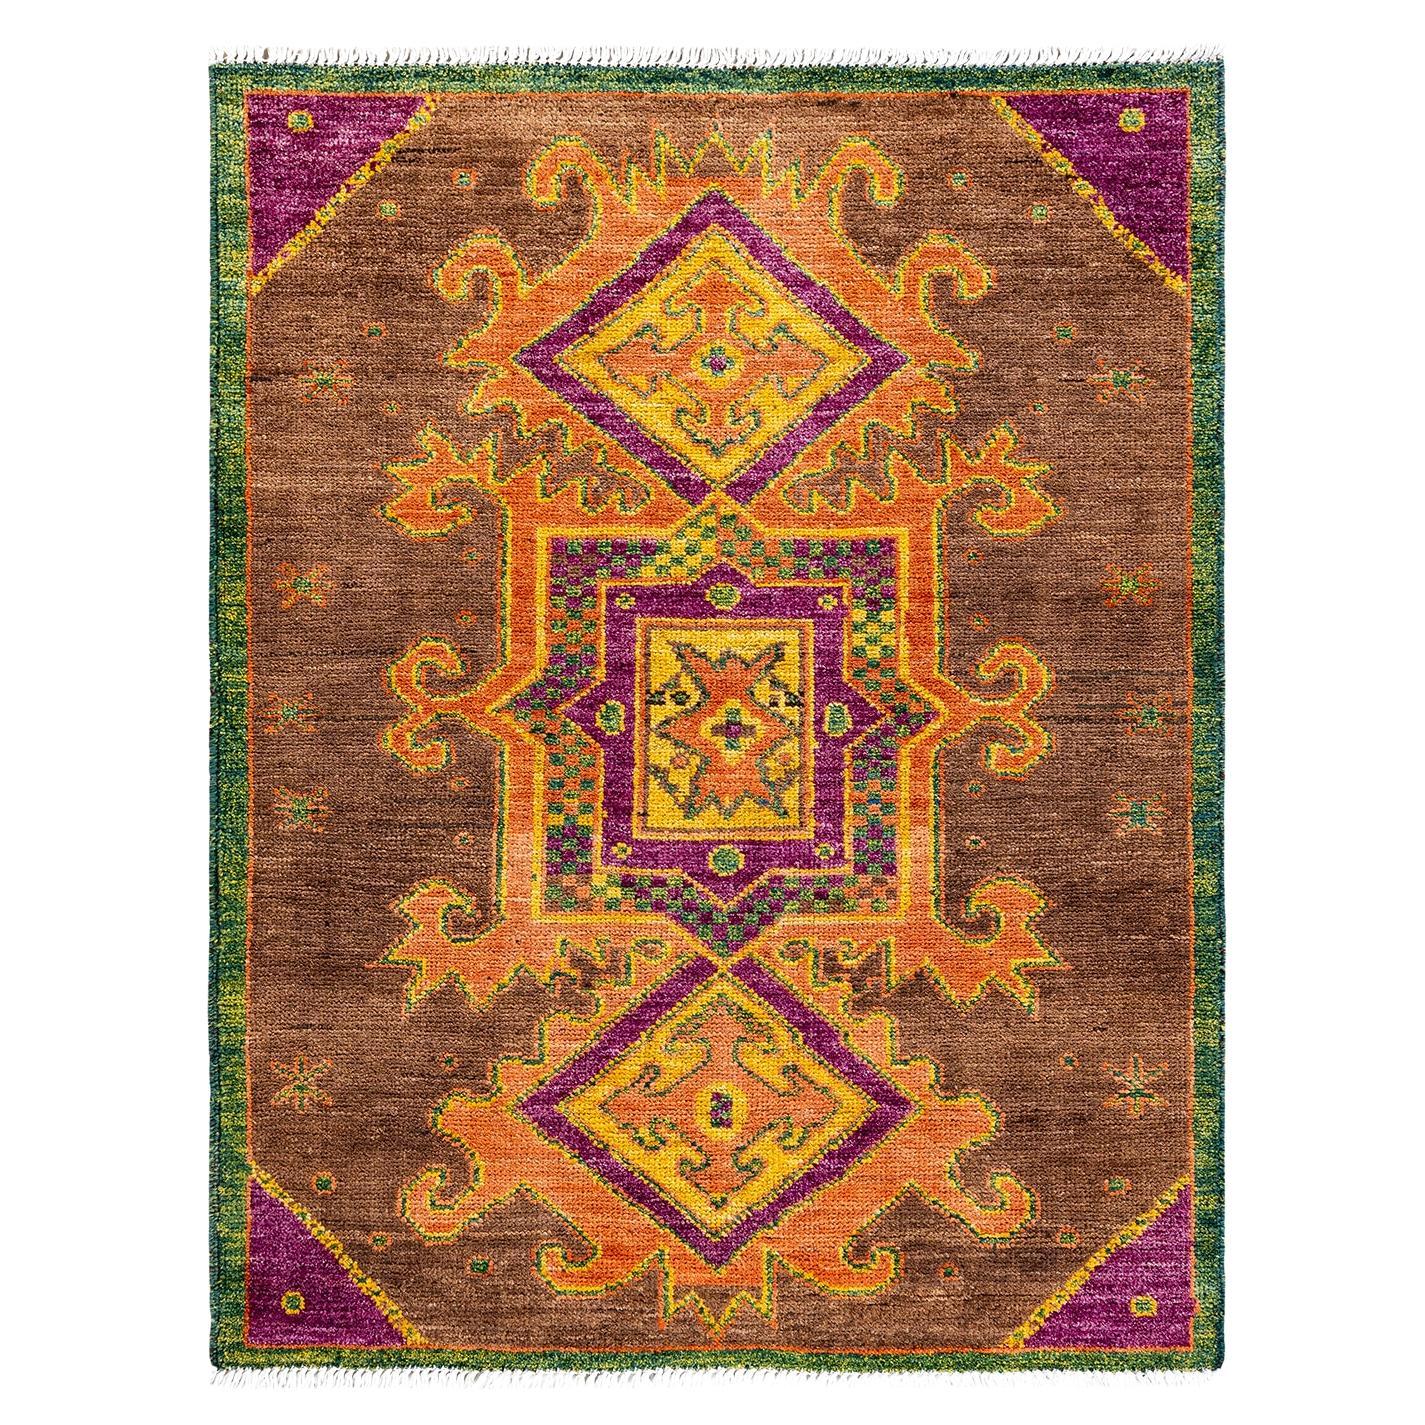 Contemporary Floral Hand Knotted Wool Brown Area Rug